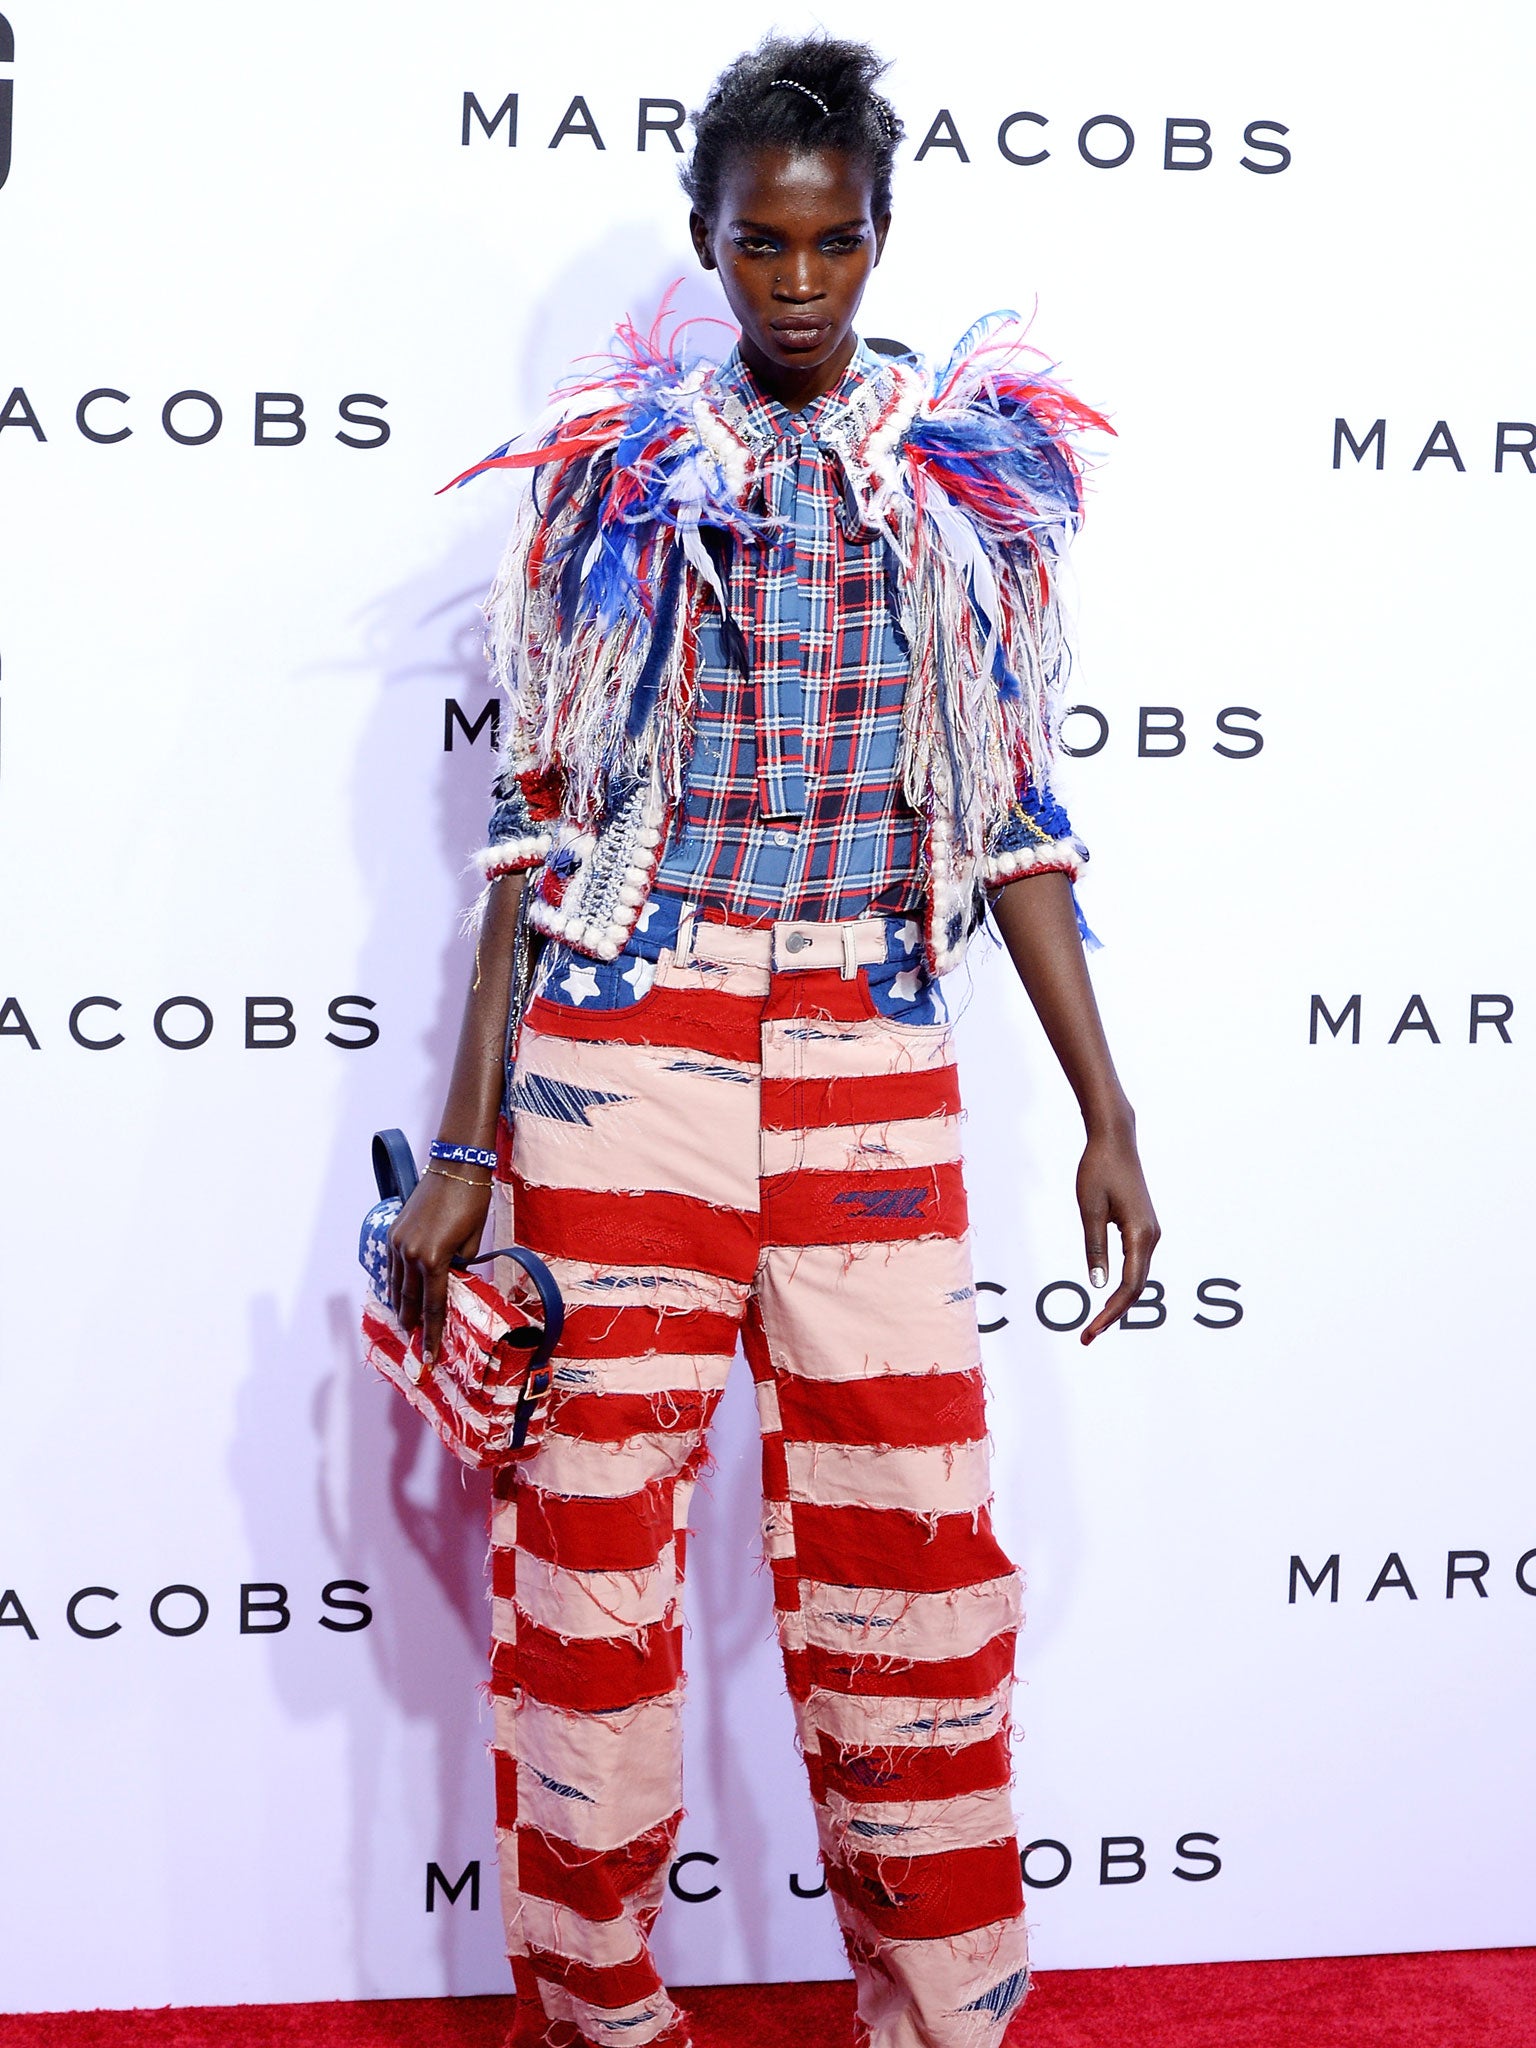 Riot of red, white and blue: Marc Jacobs spring/summer 2016